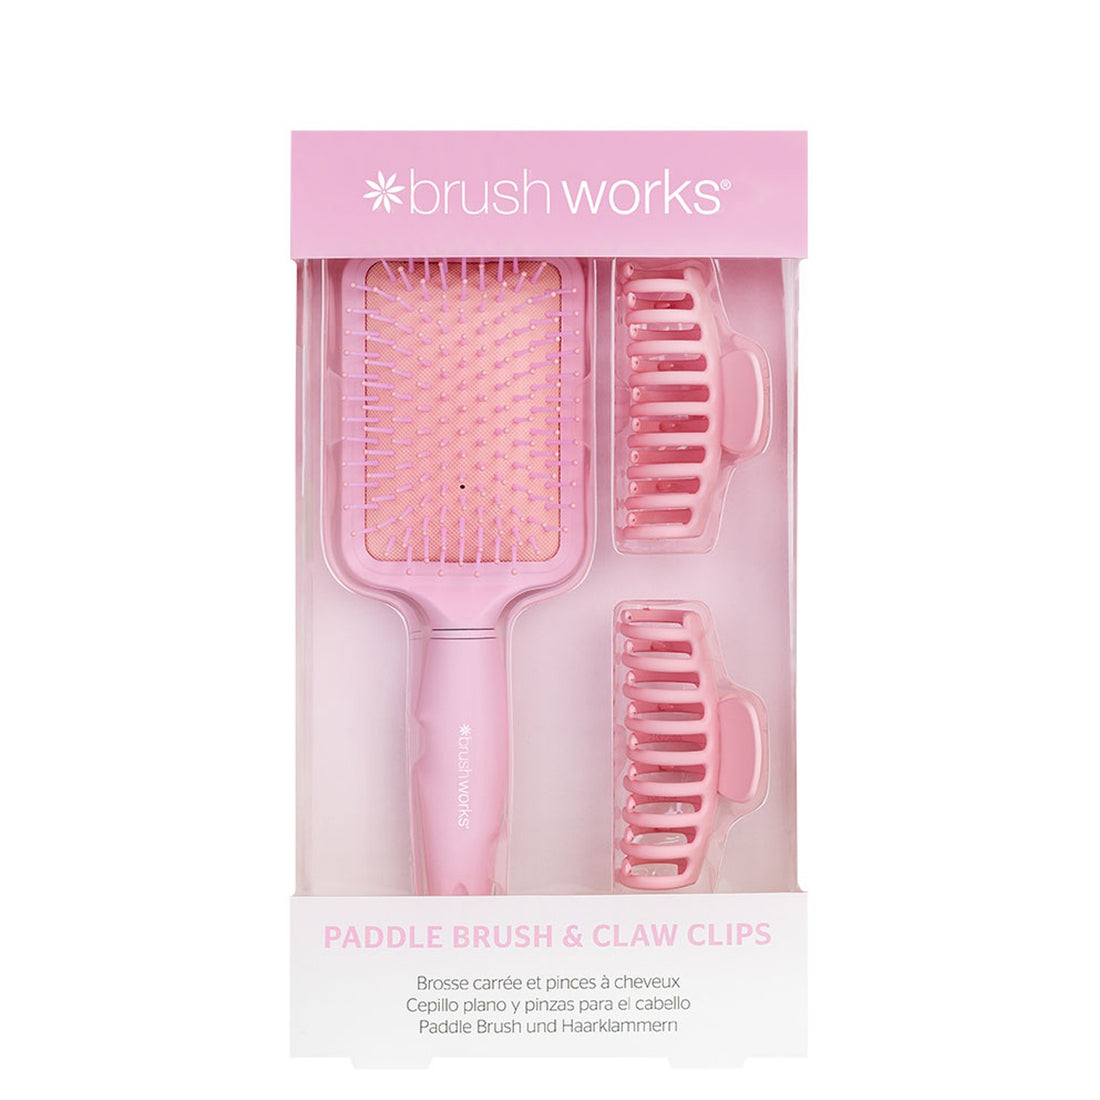 Brushworks Paddle Brush and Claw Clips 2 clips